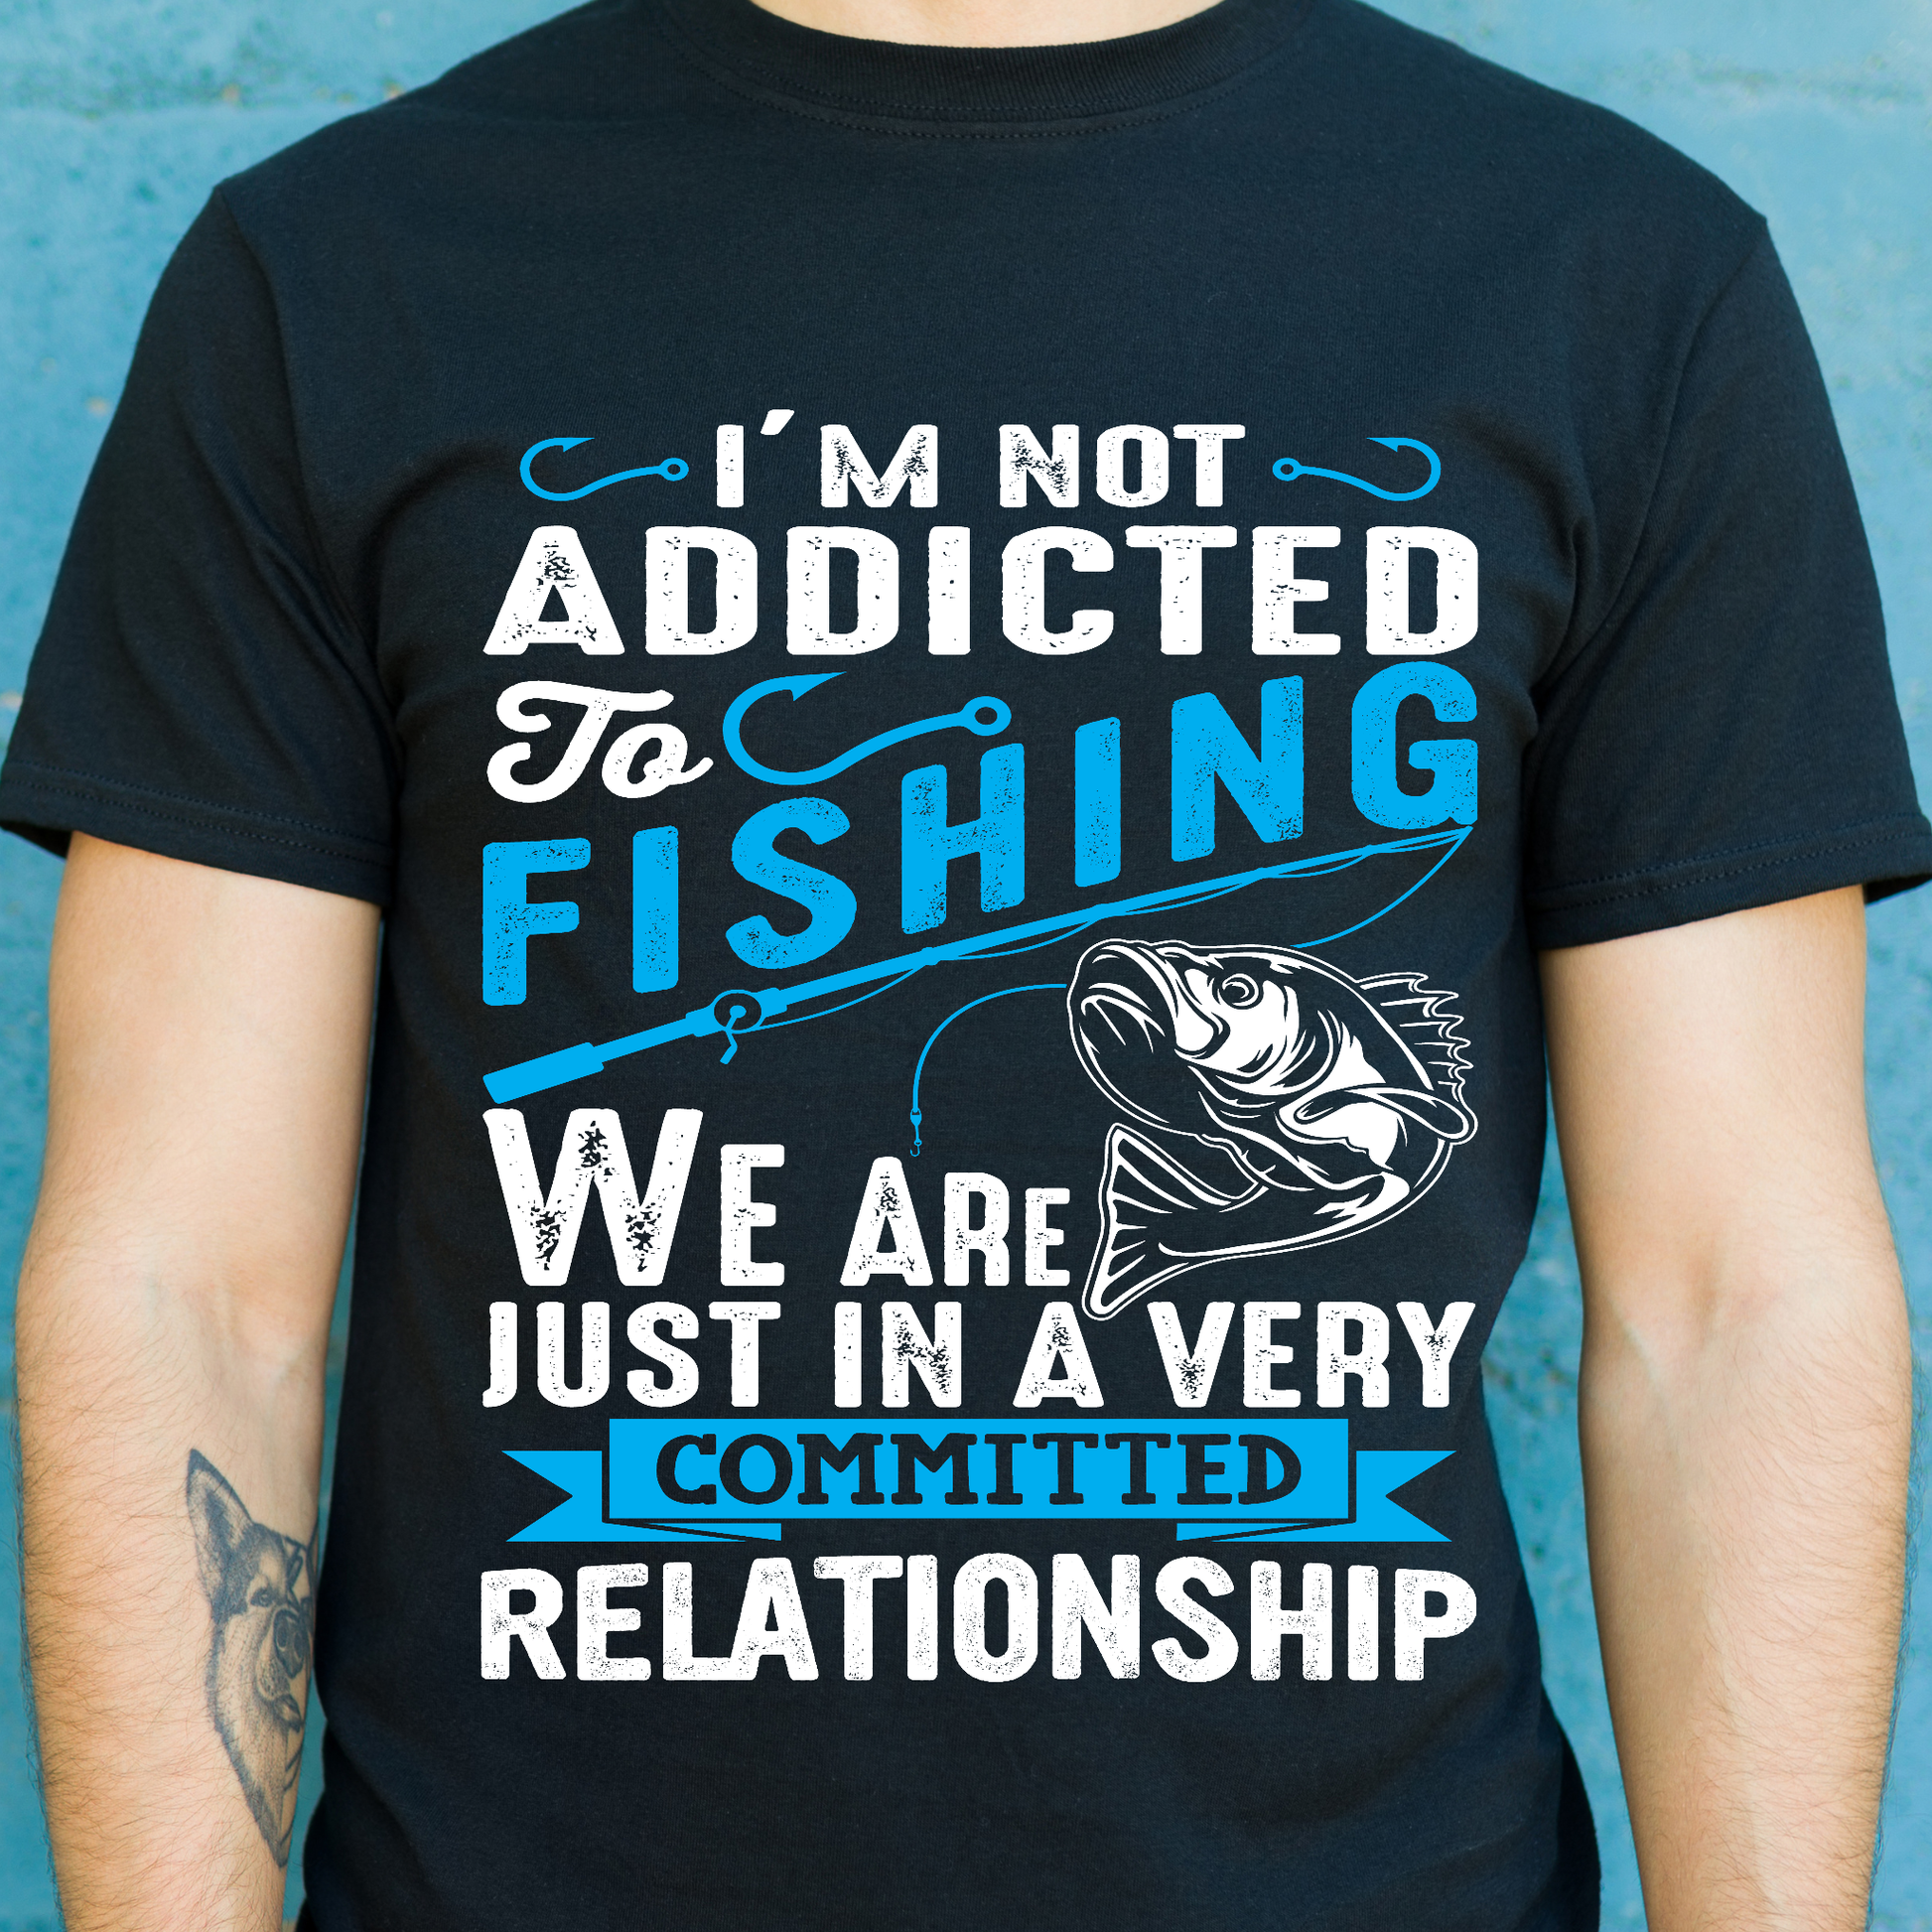 I'm addicted to fishing we are just in a very commited relationship - Premium t-shirt from Lees Krazy Teez - Just $19.95! Shop now at Lees Krazy Teez